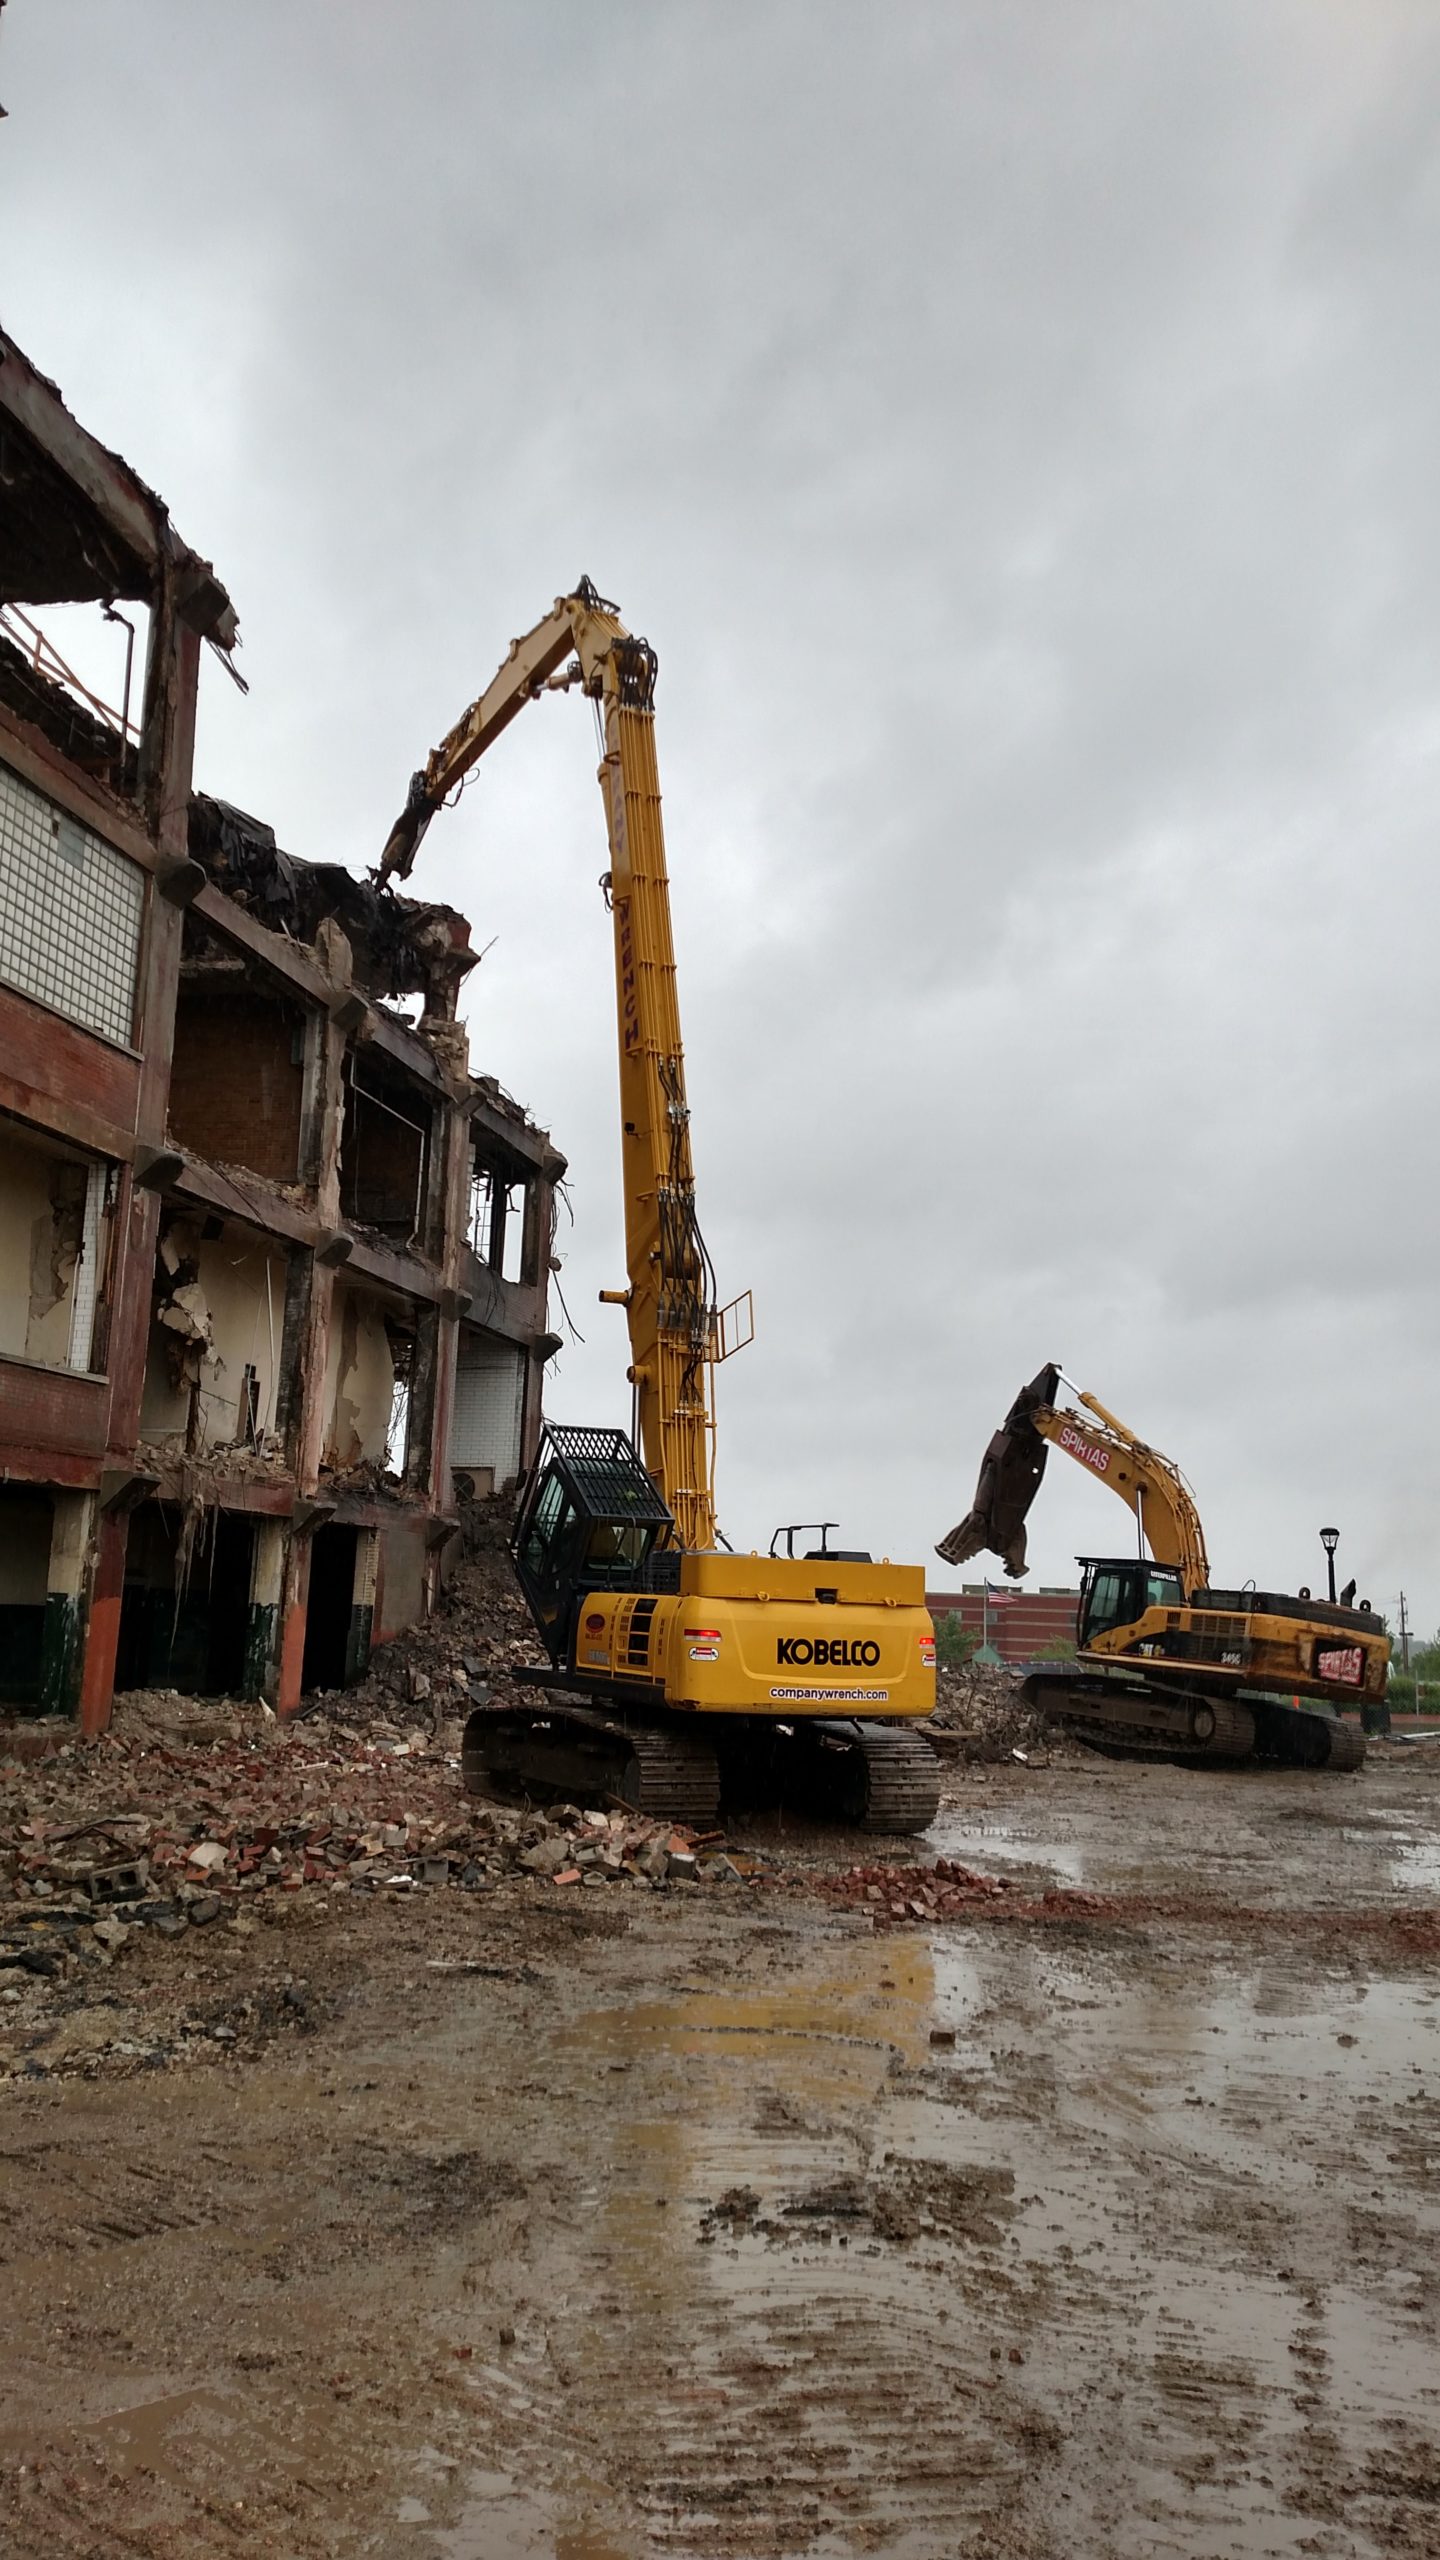 High Reach working on SLU Medical Campus Renewal Project – Demolition of Former Pevely Dairy & Missouri Belting Buildings